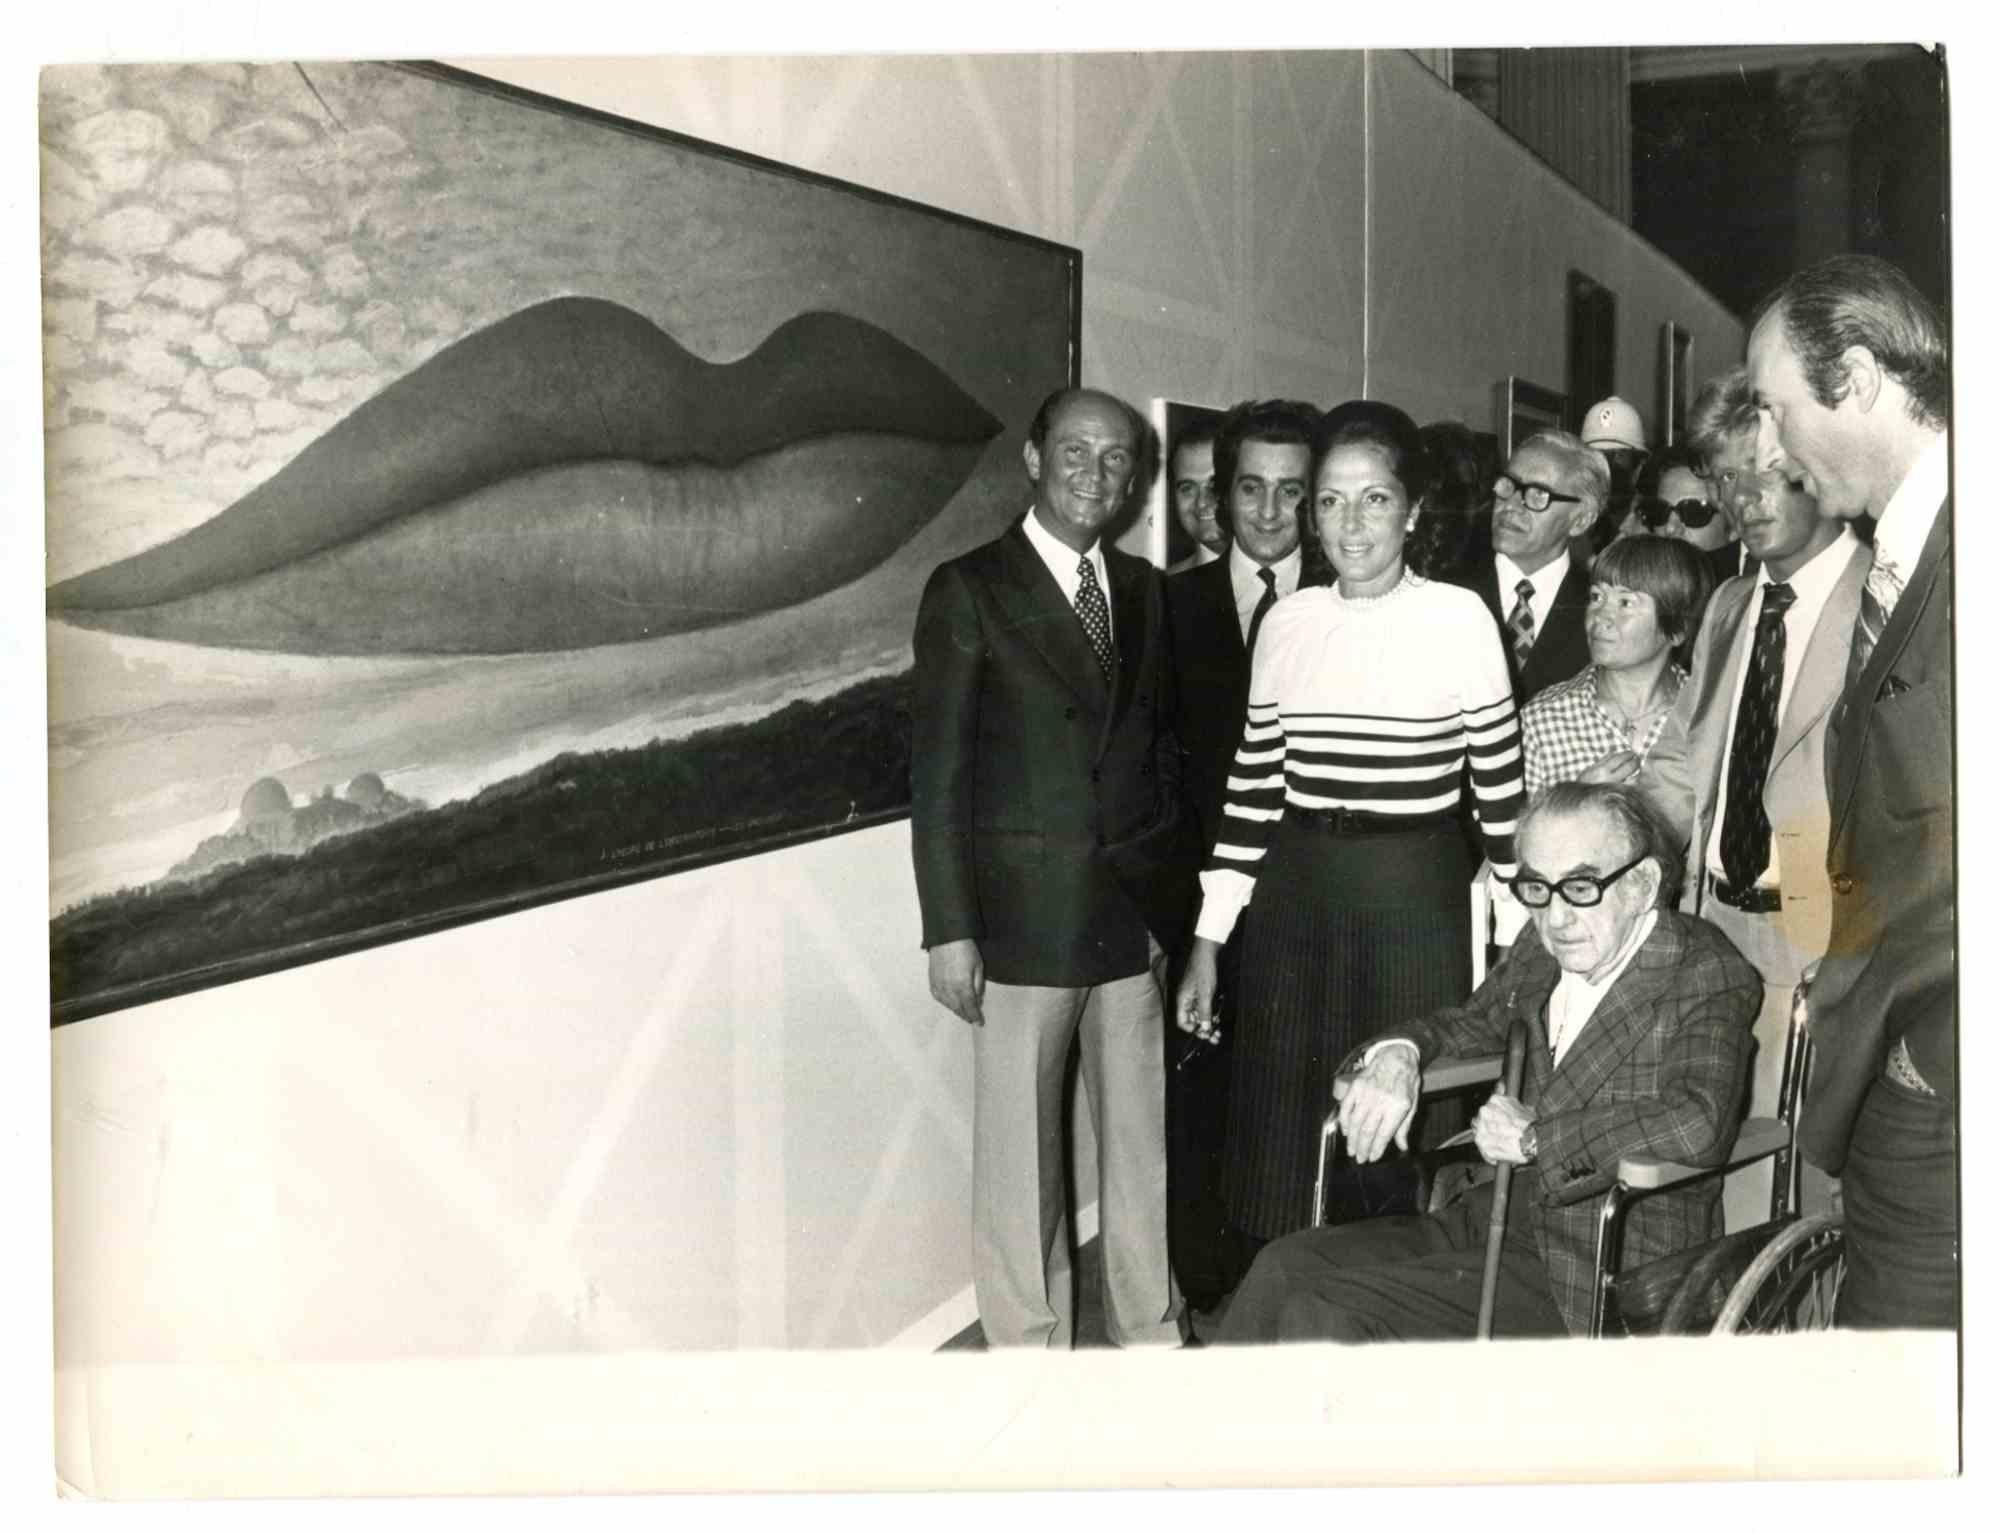 Unknown Figurative Photograph - Exhibition of Man Ray's Photographs in Rome - Vintage Photo - 1975